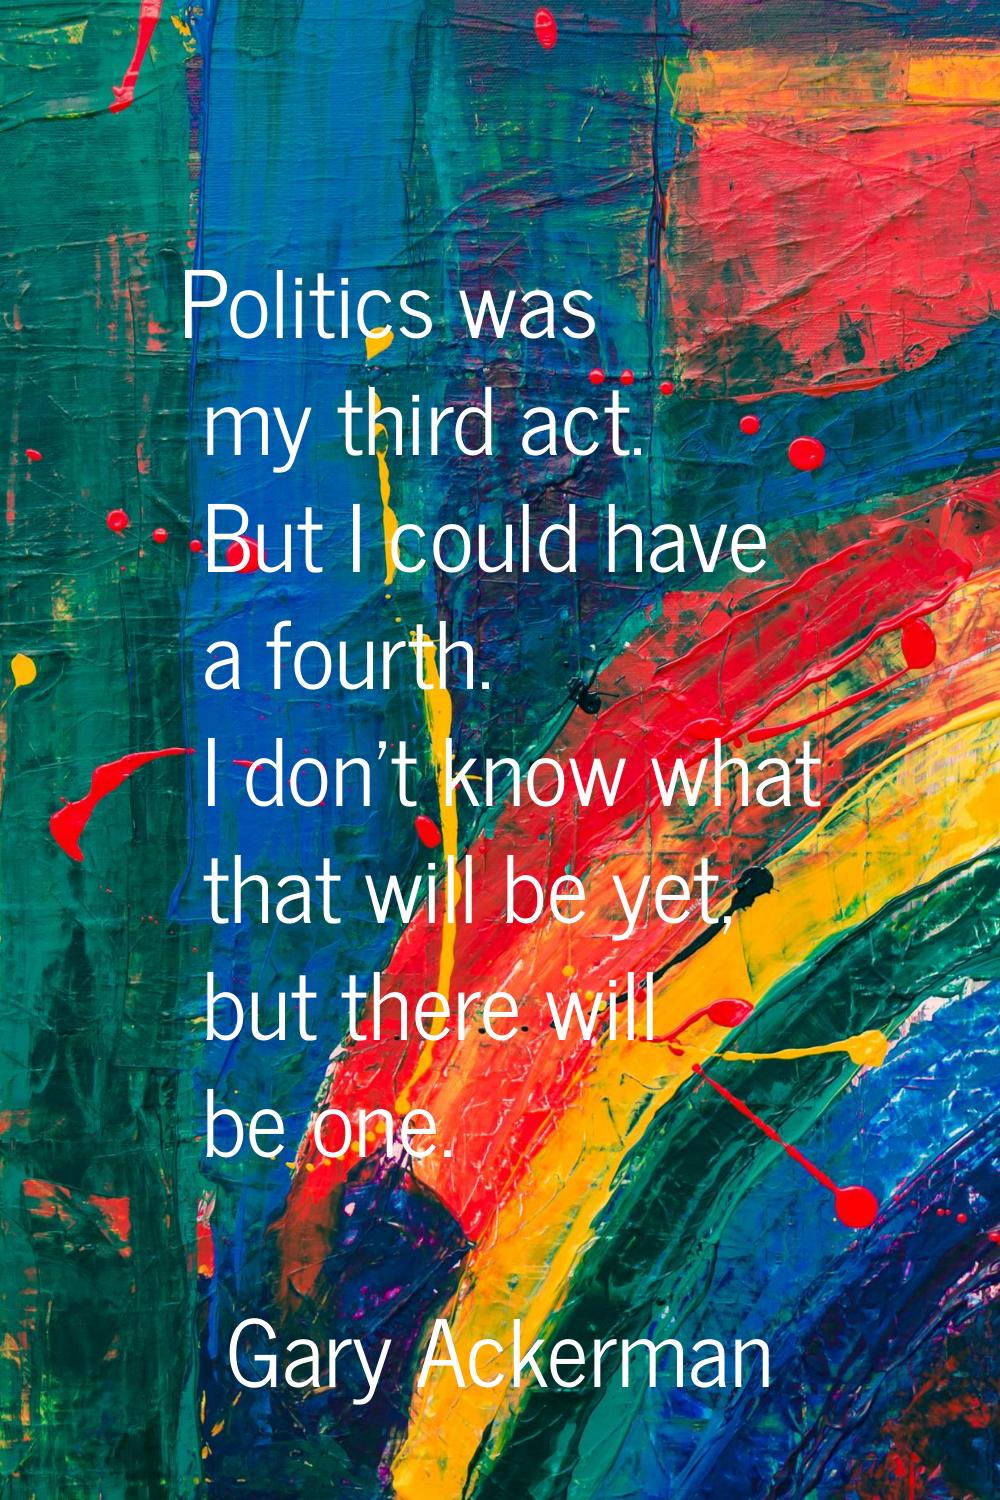 Politics was my third act. But I could have a fourth. I don't know what that will be yet, but there